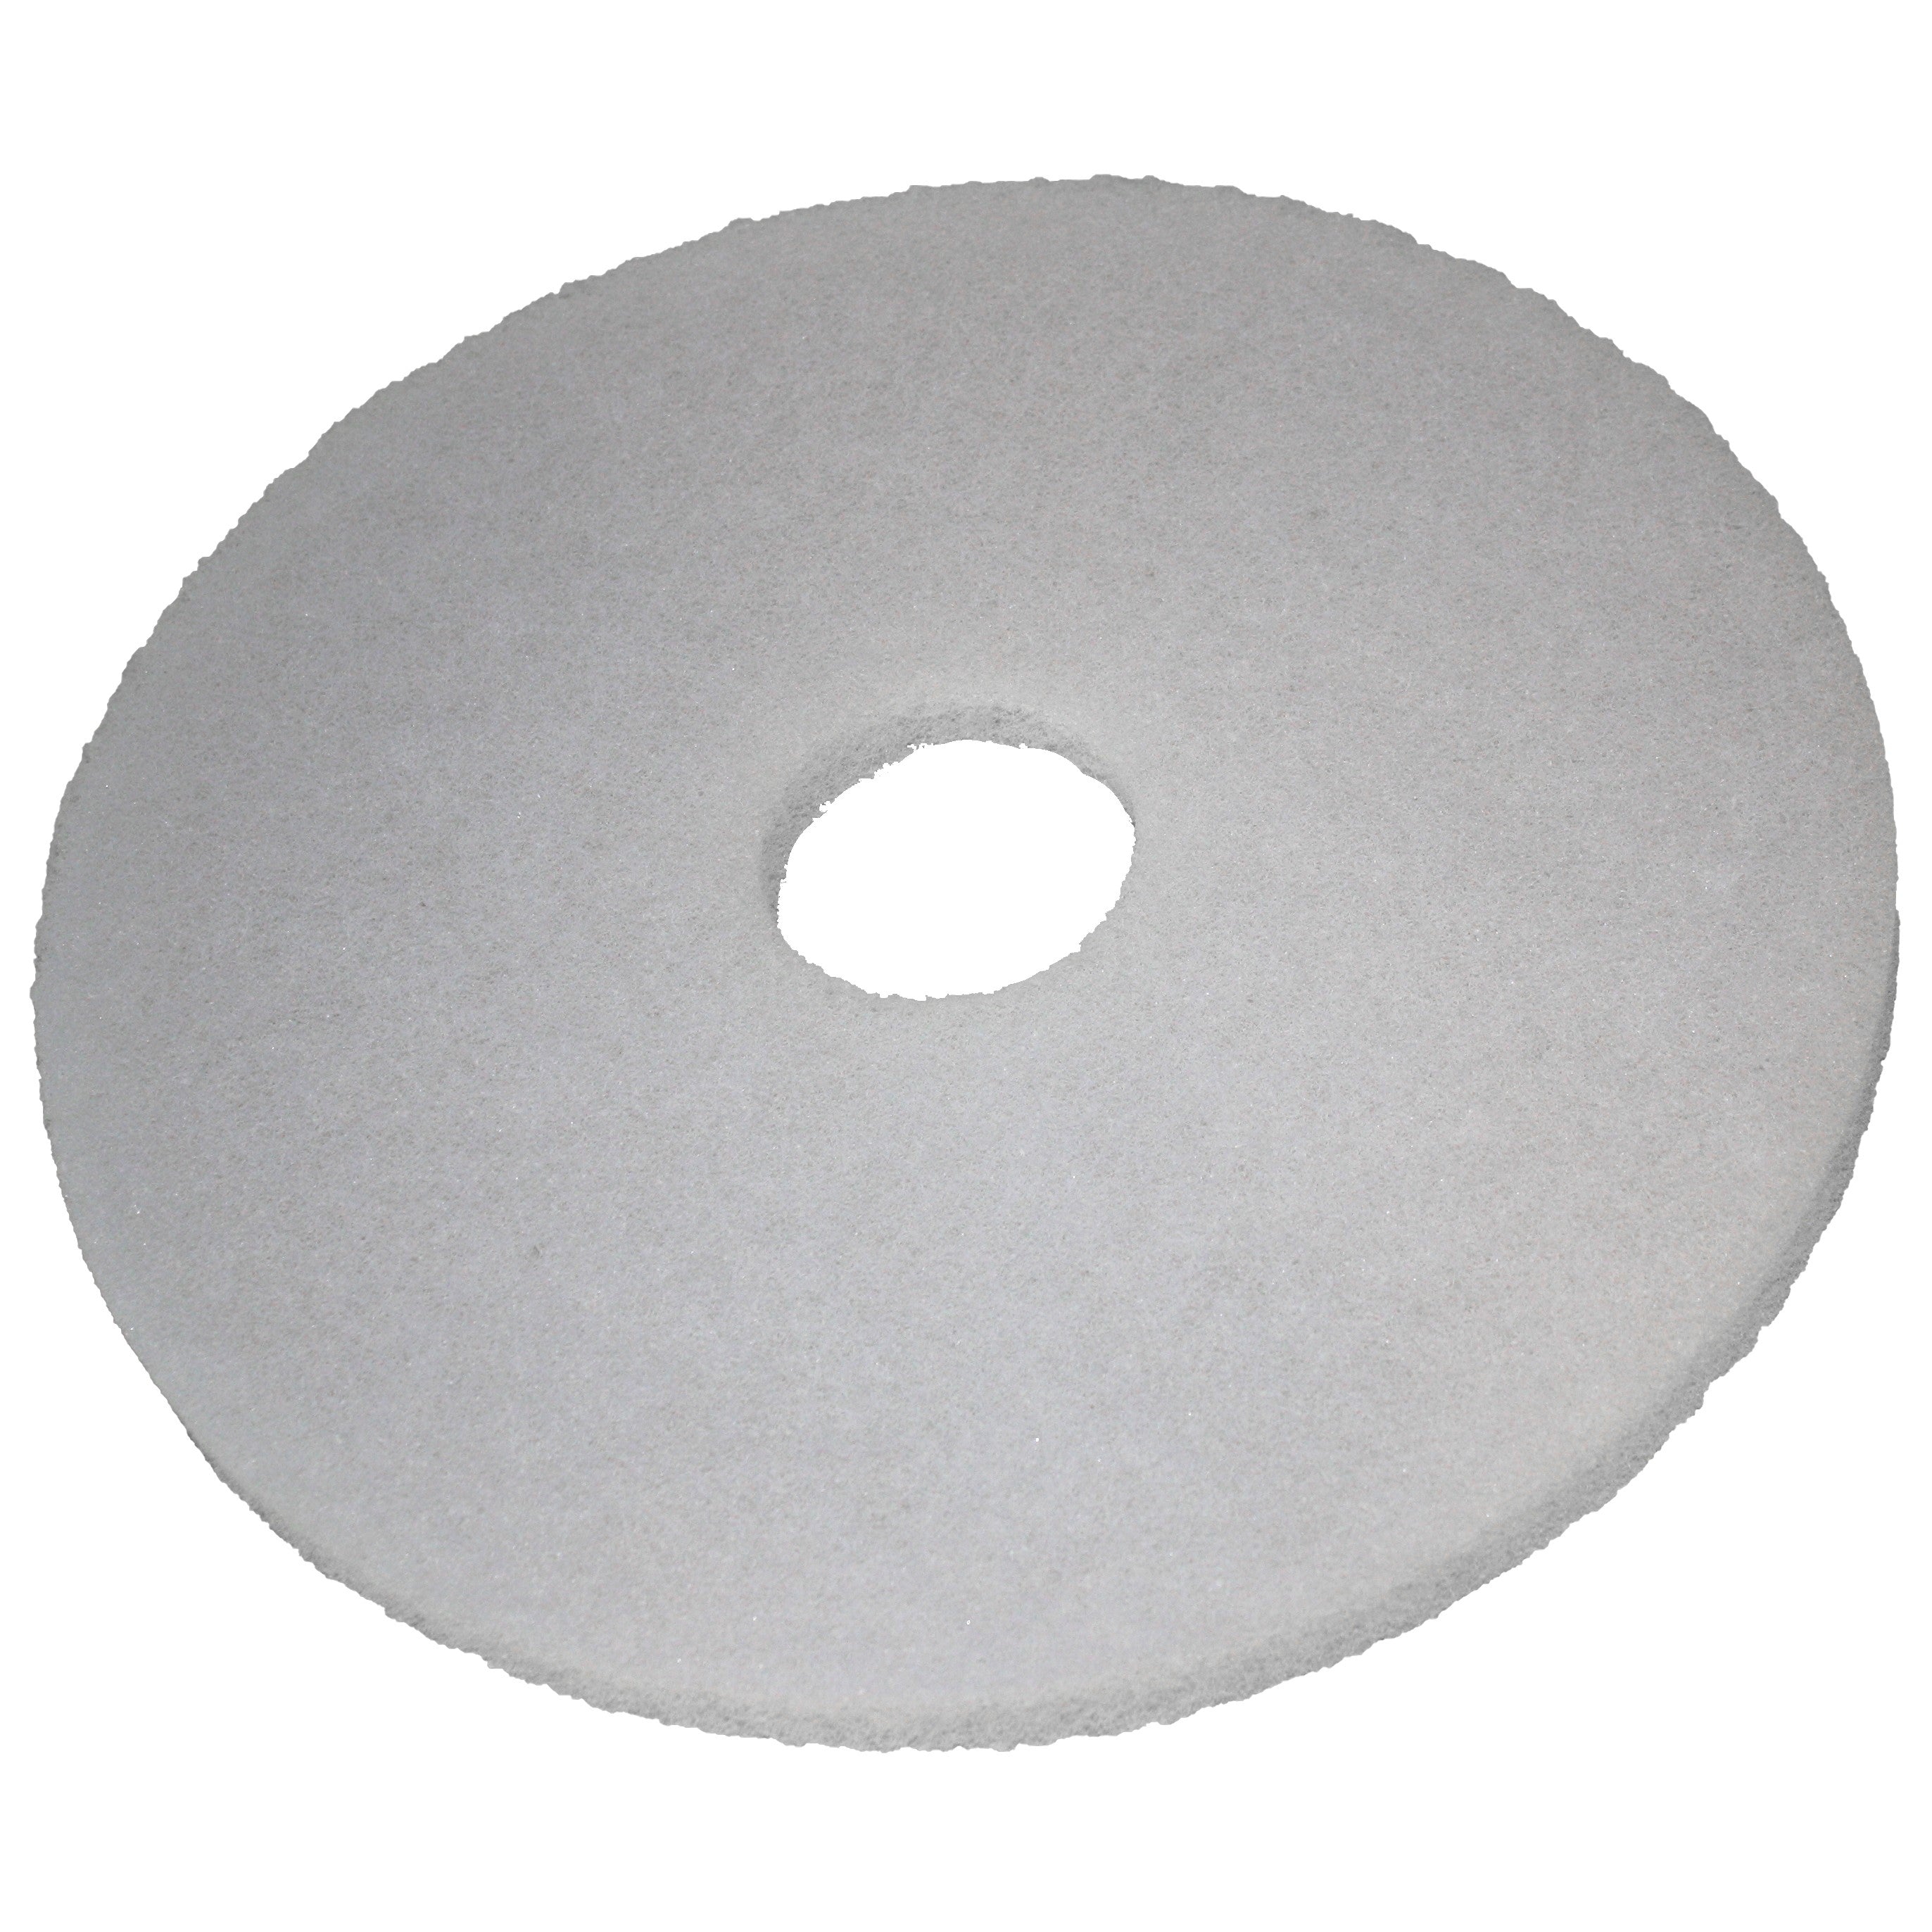 Pad weiss, Ø 280 mm, Polyester